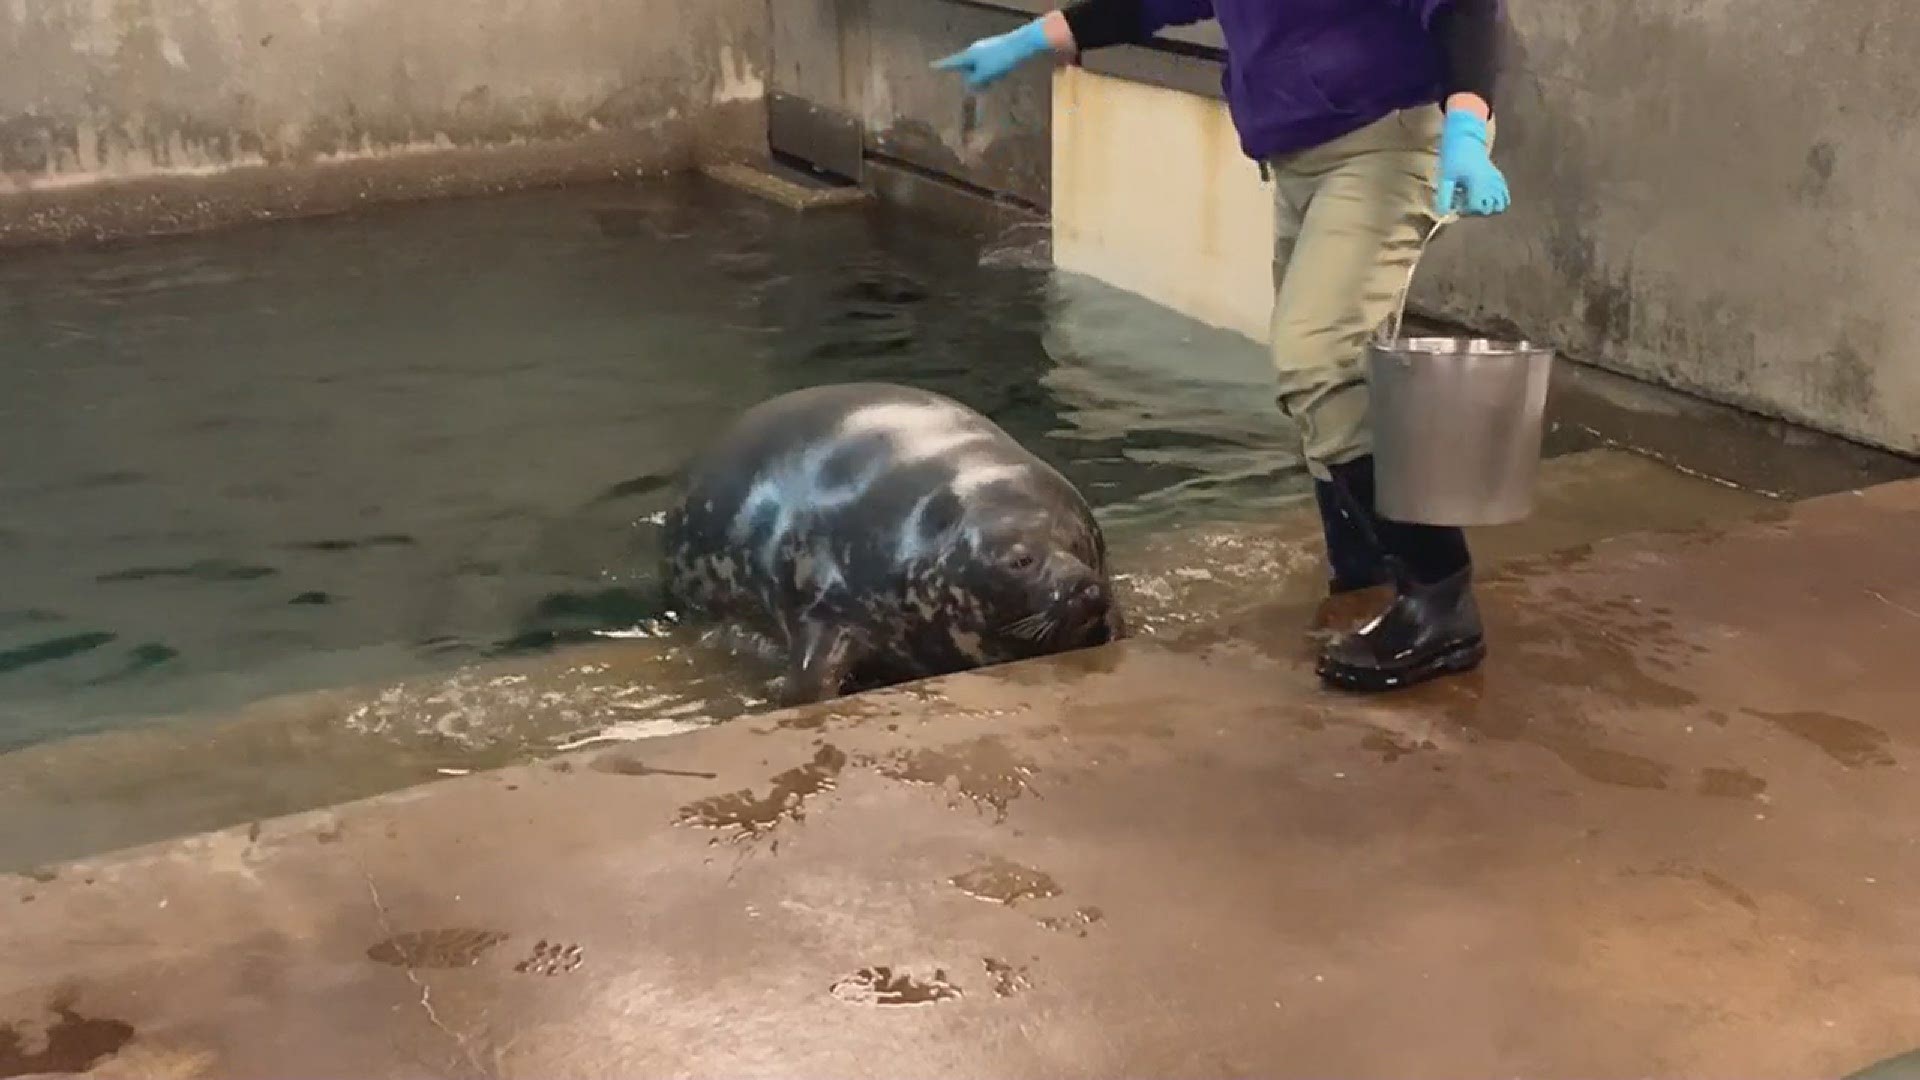 Rona is a six-year-old gray seal who is expecting her first pup.